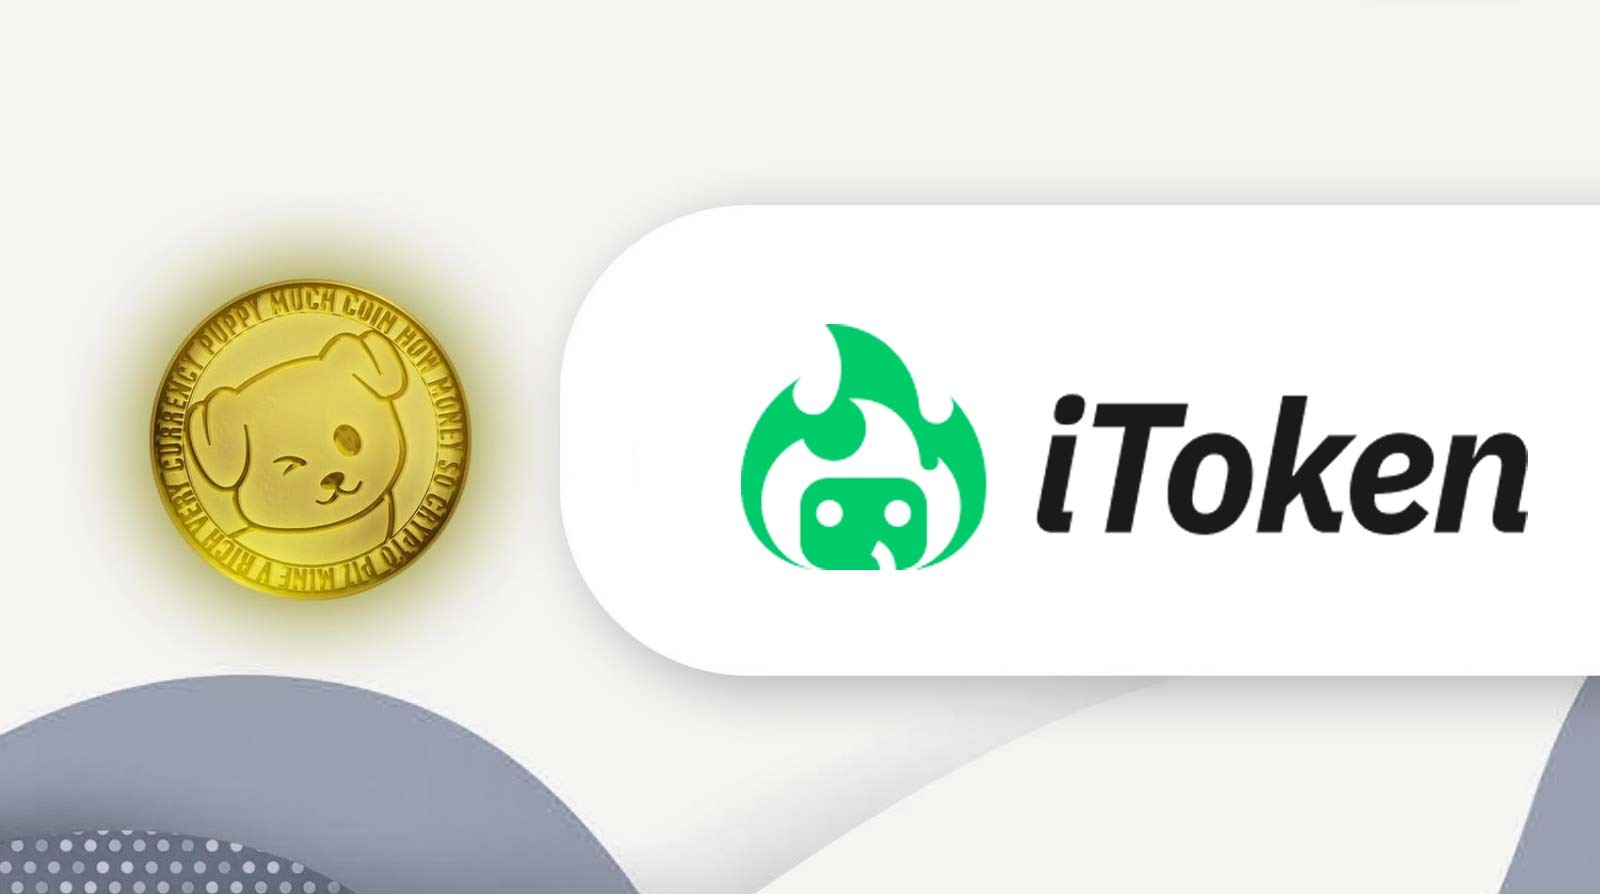 How to buy Puppy coin on iToken